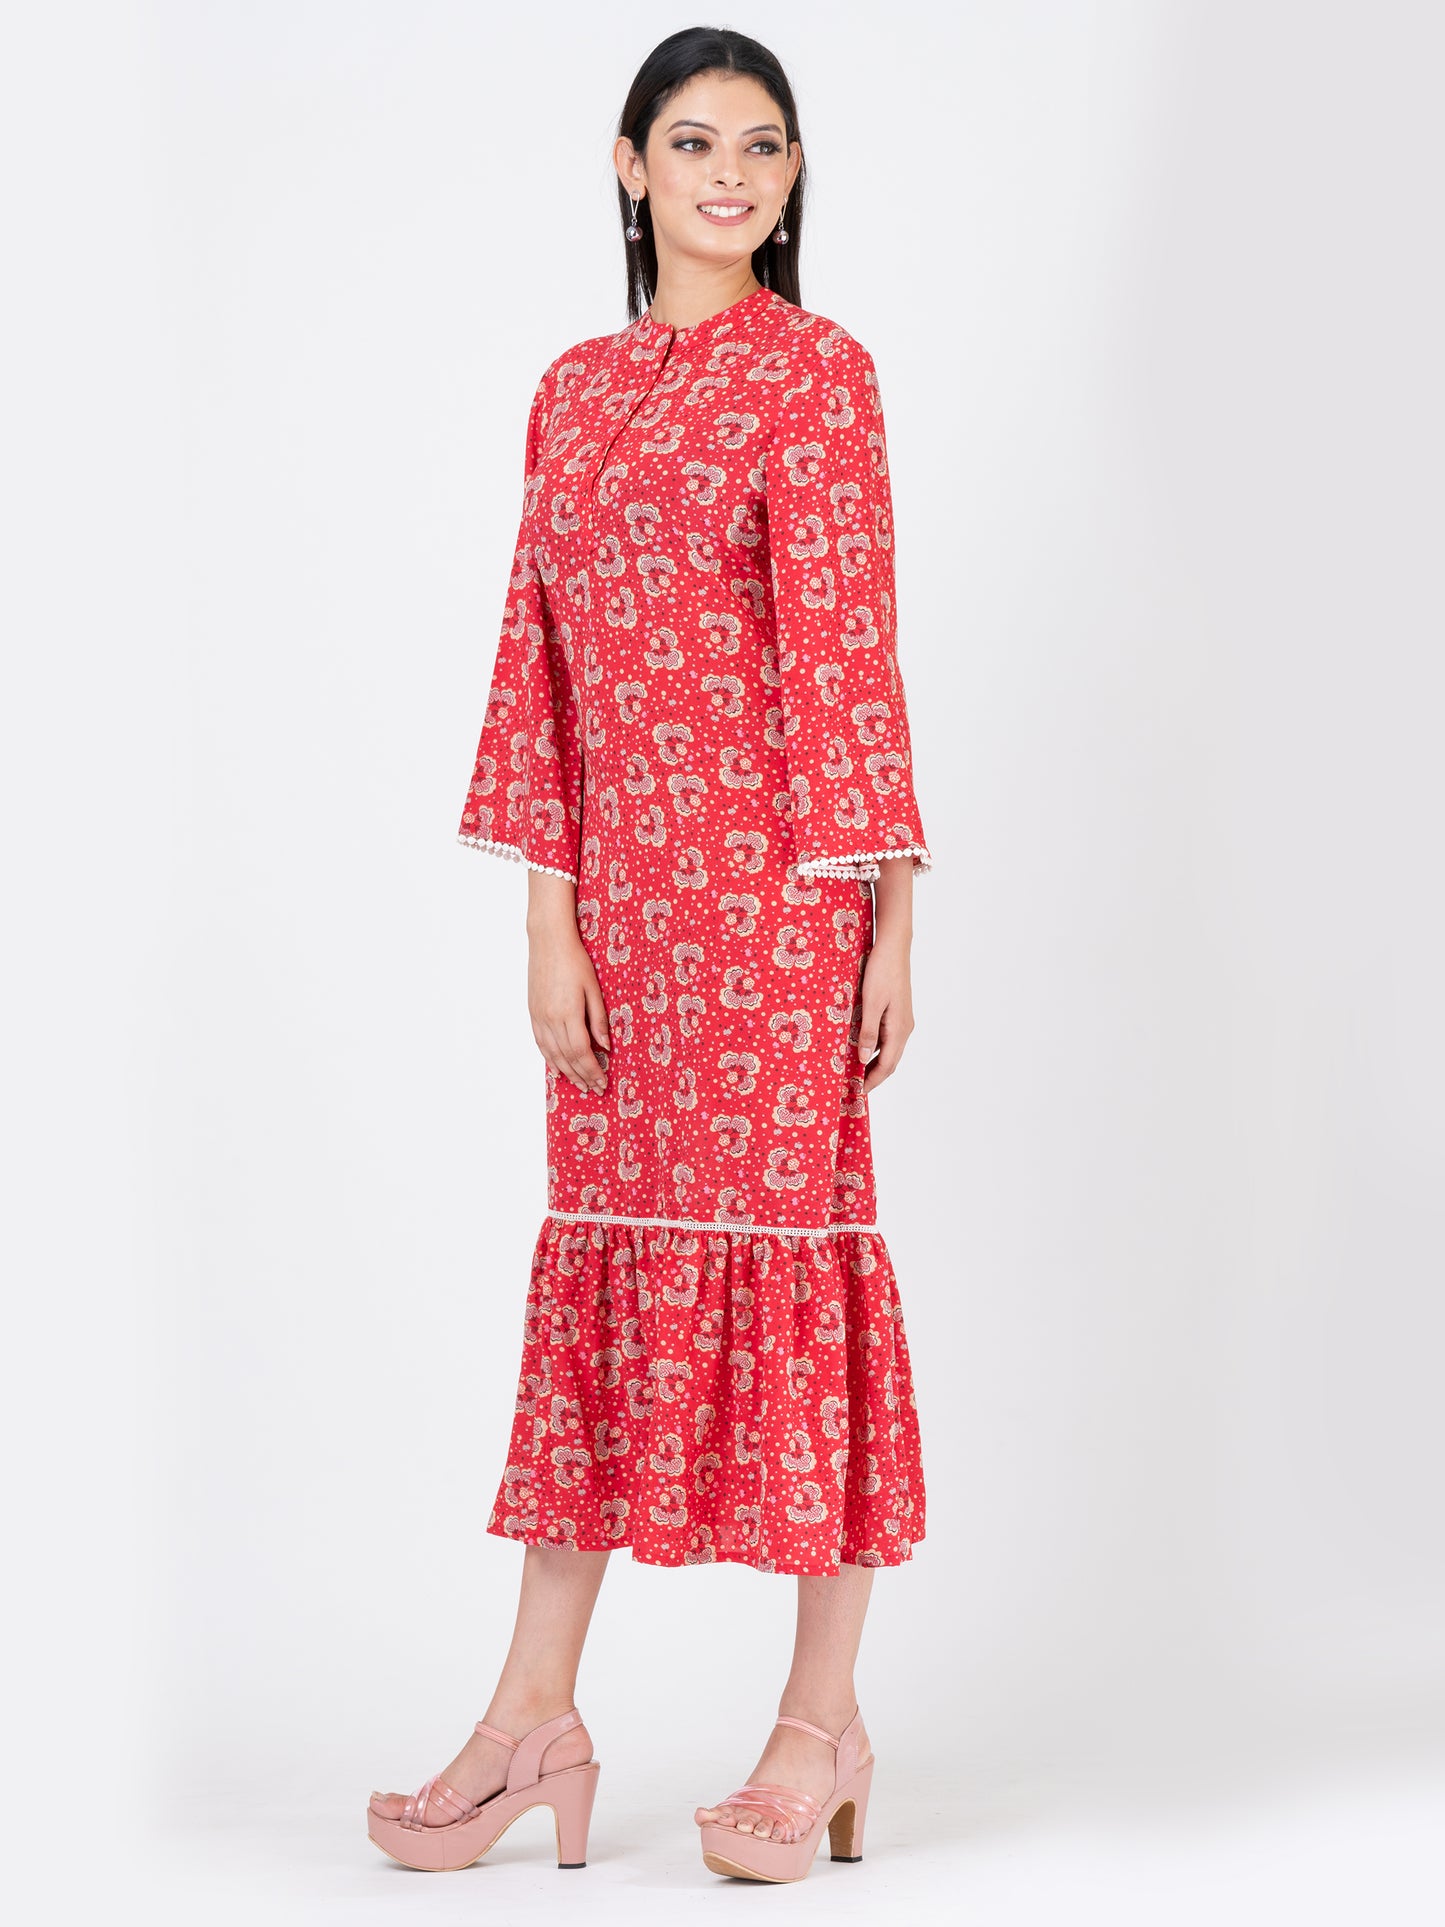 Women's Floral Printed Coral Casual Midi Dress